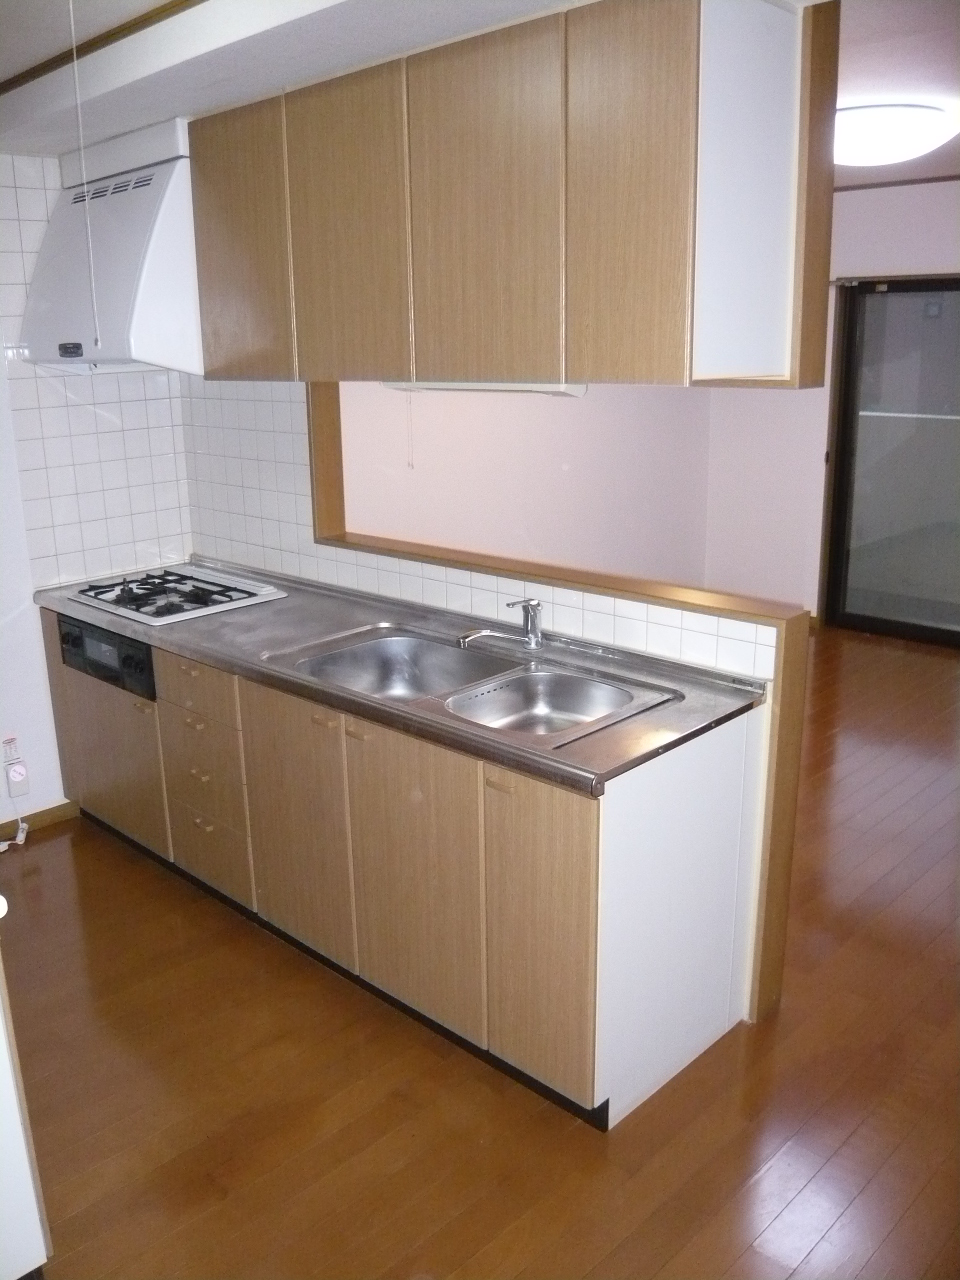 Kitchen. As you can see it is a luxury system Kitchen